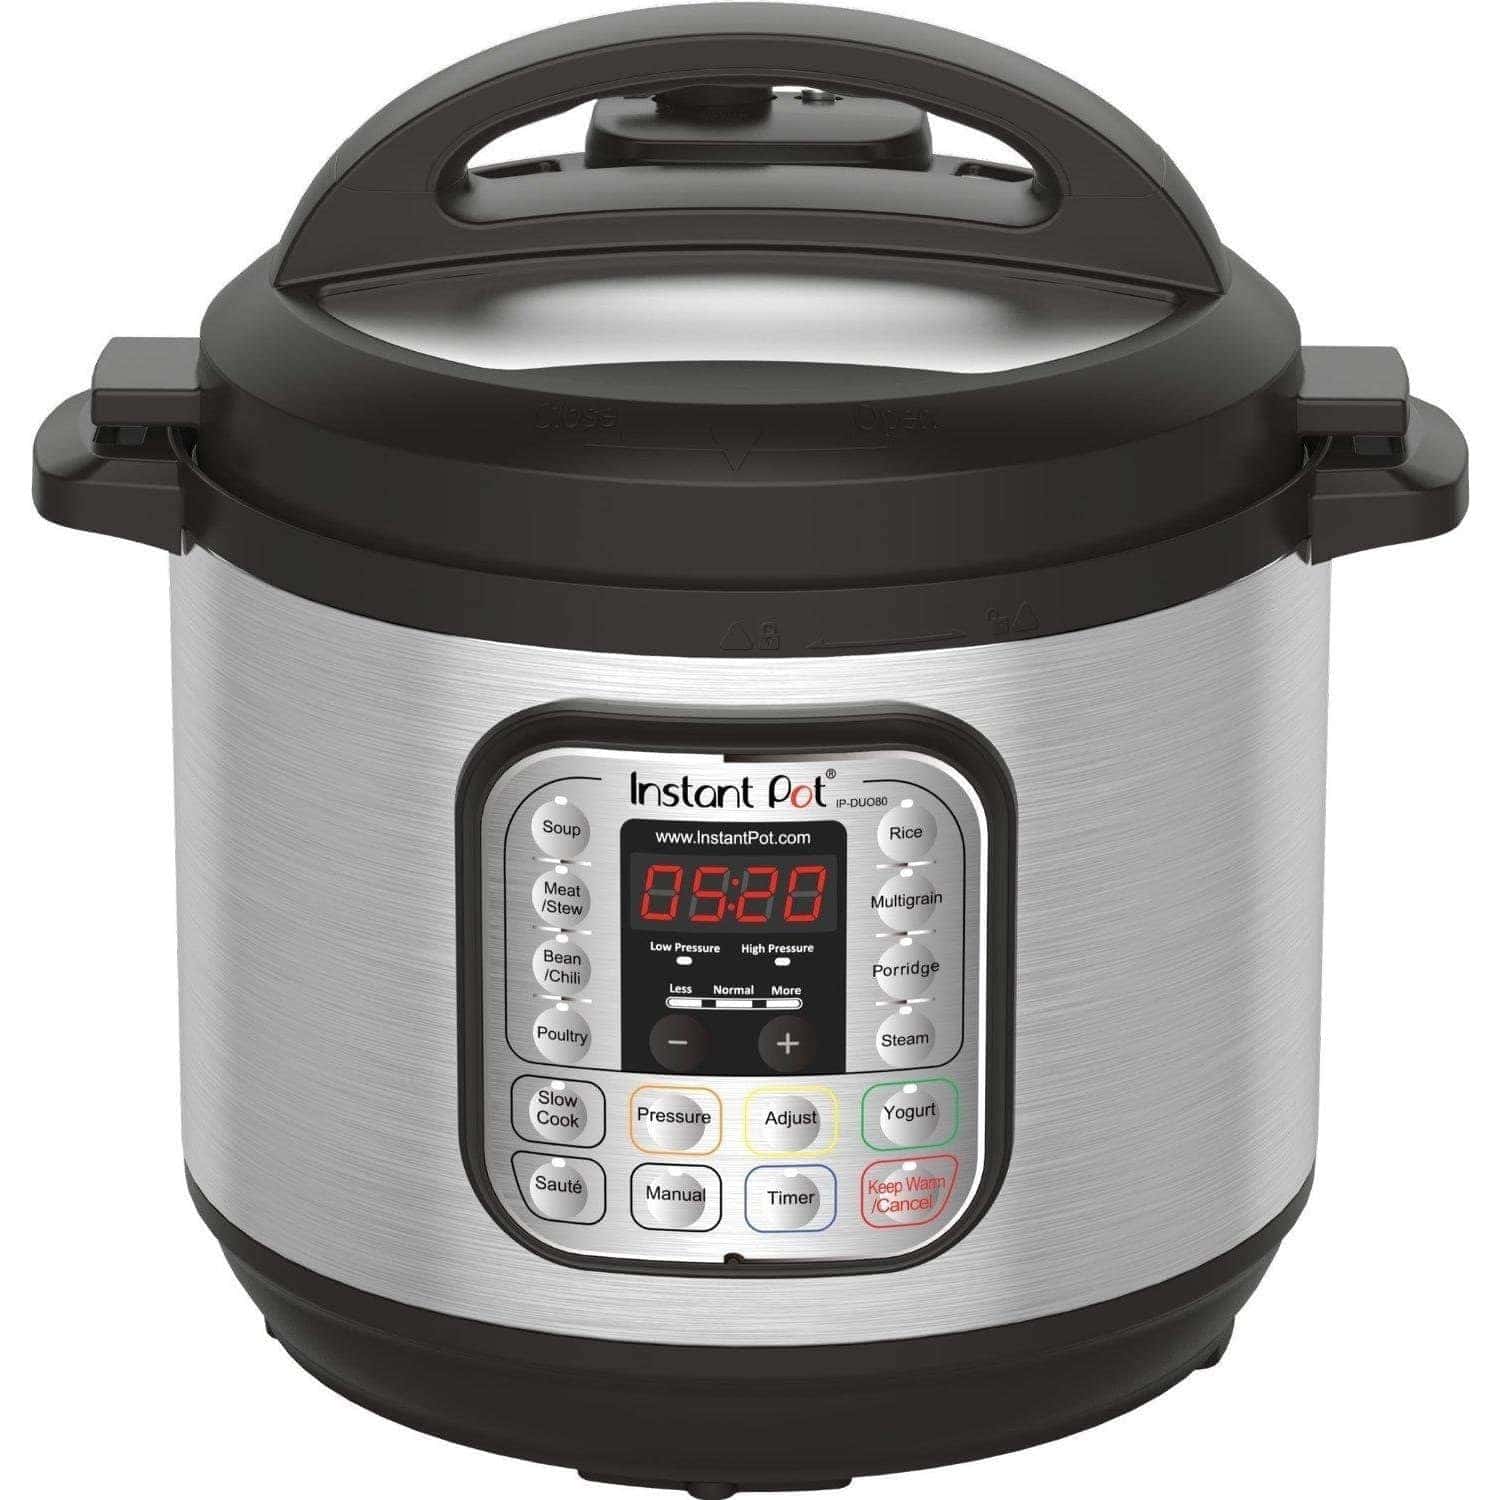 Getting Started with your Instant Pot Pro, 6qt or 8qt 